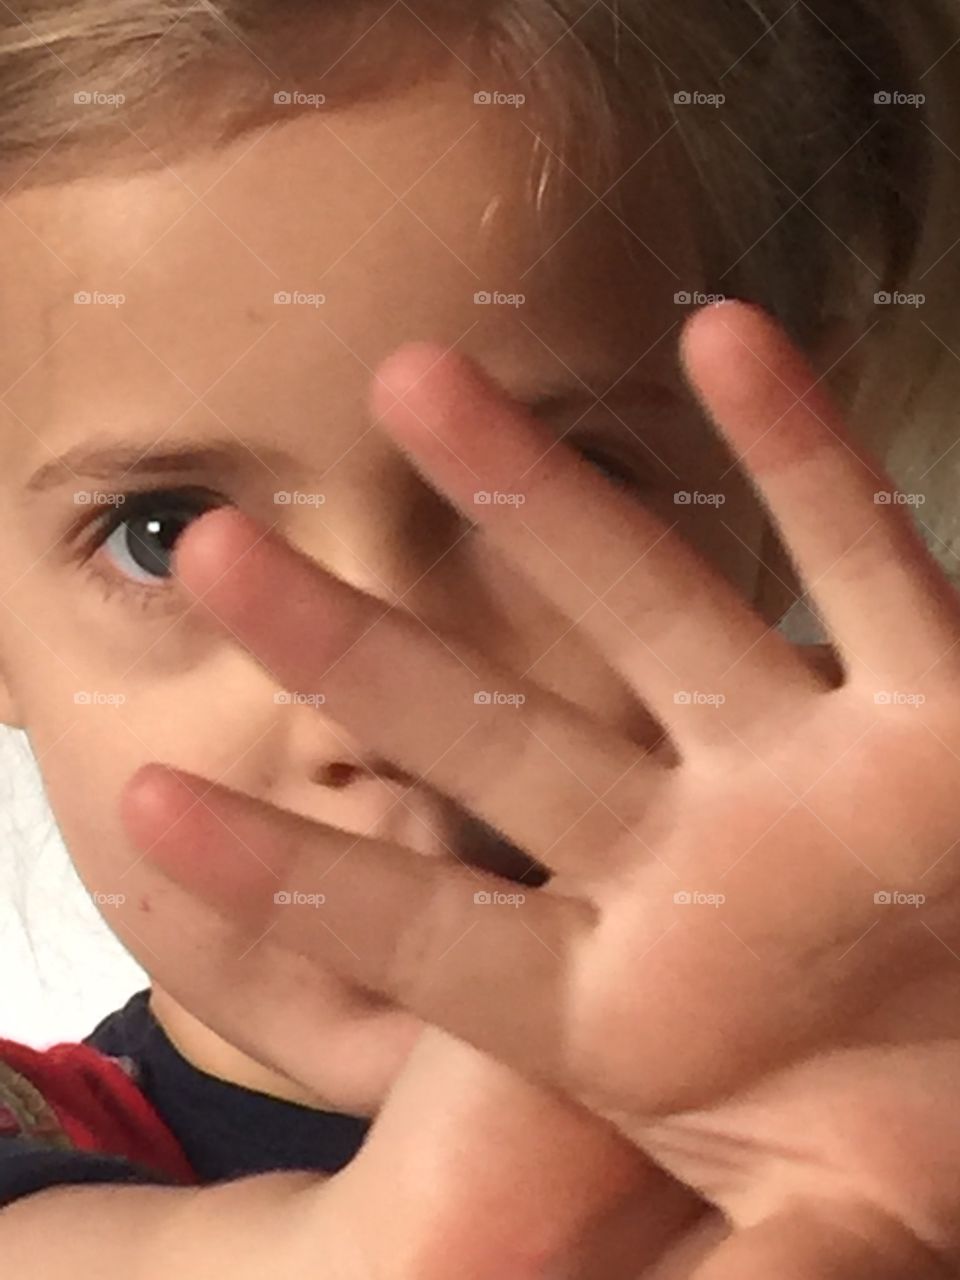 Child covering its face